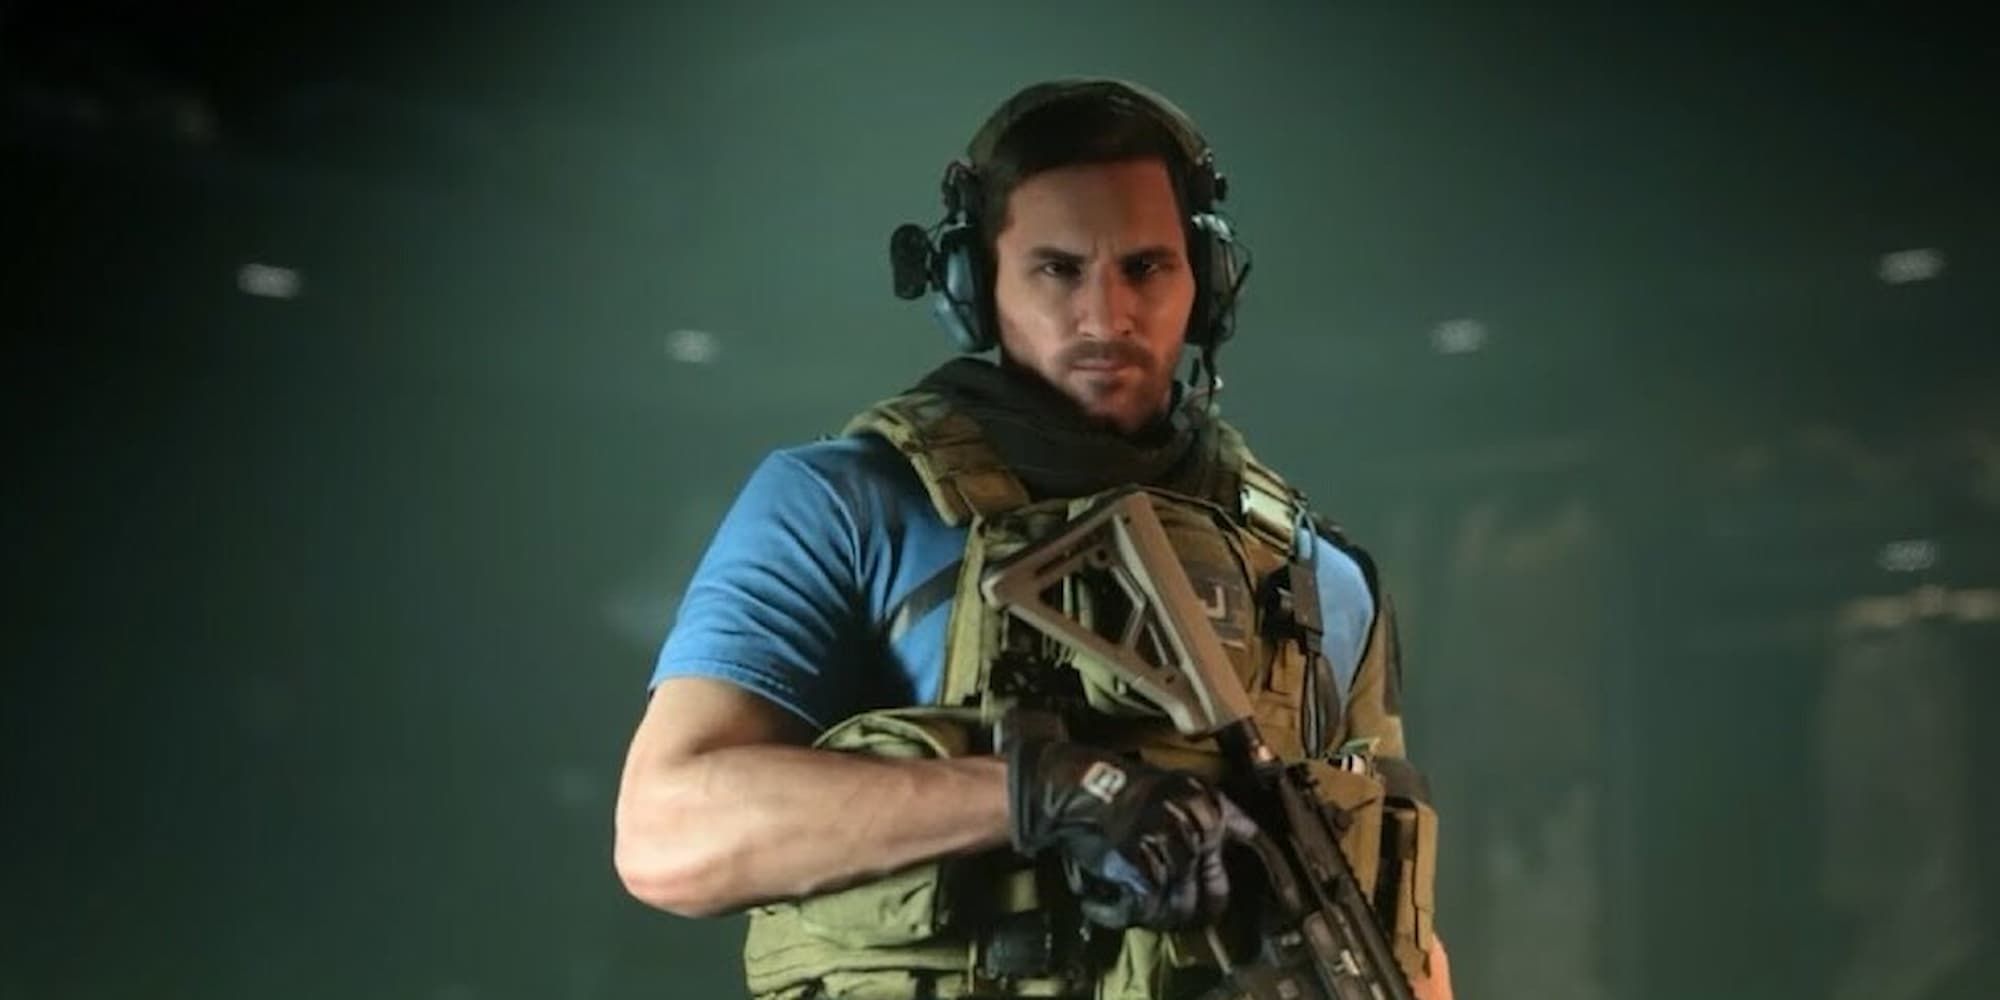 Lionel Messi holds an SMG for his collaboration appearance in MW2.